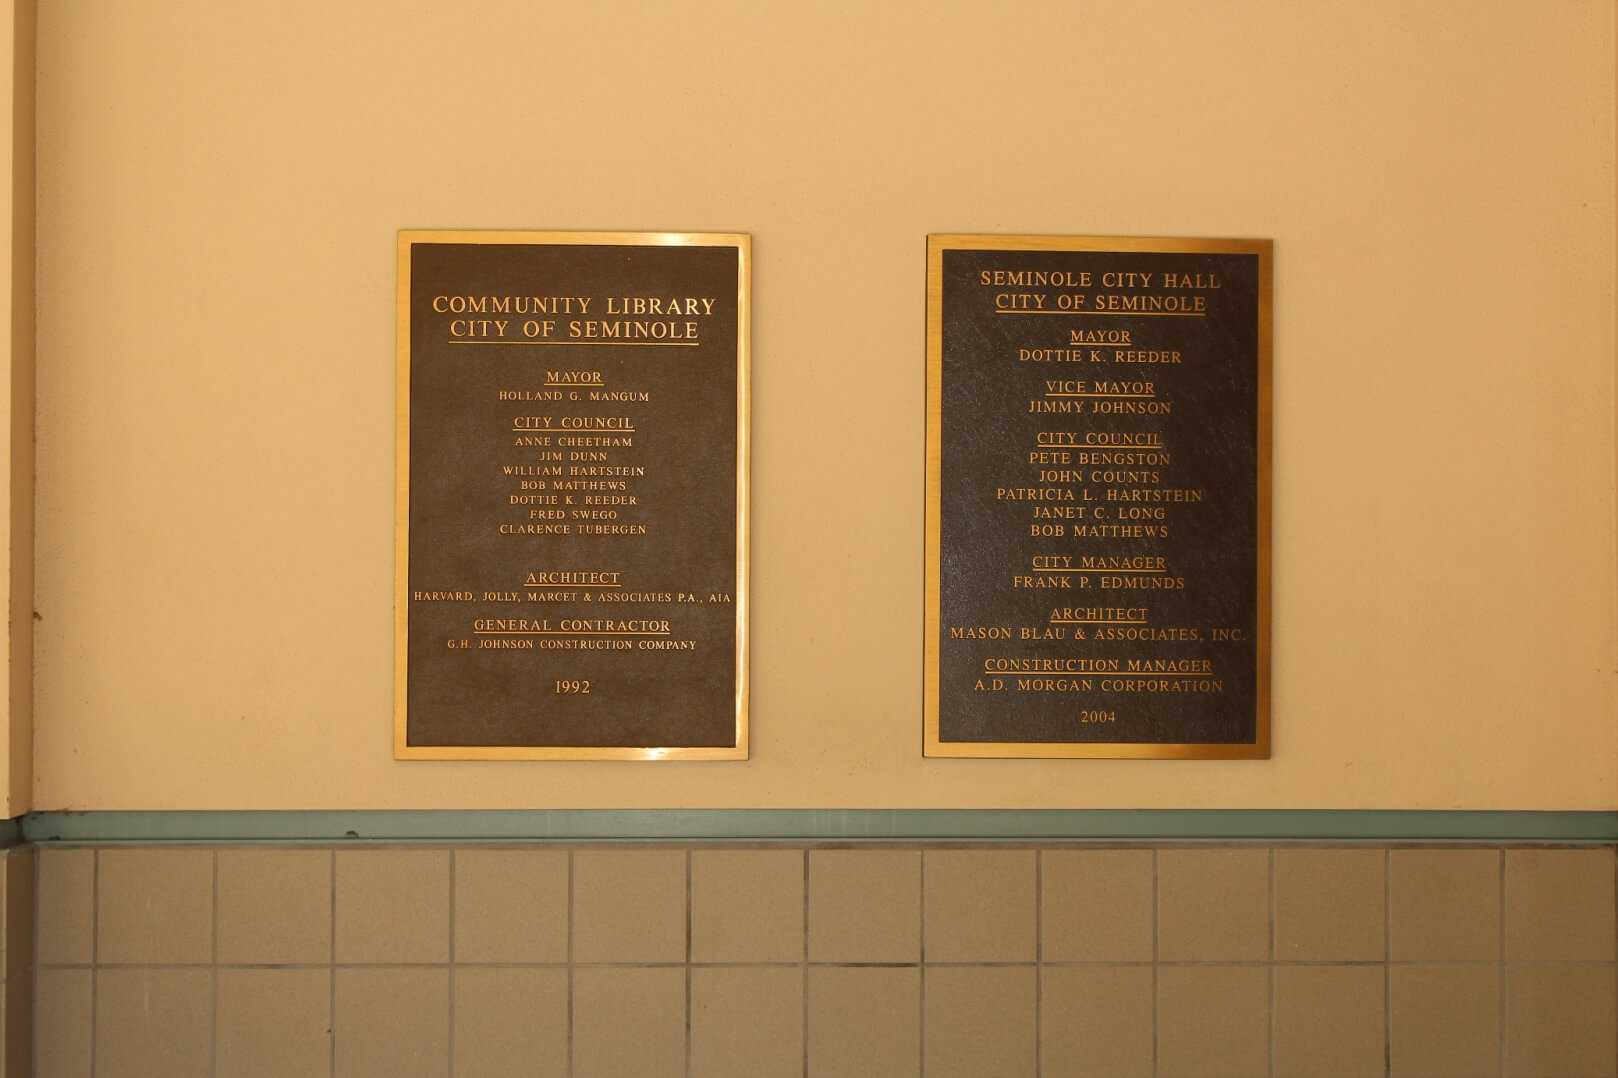 Dedication Plaques outside of City Hall for Library and City Hall